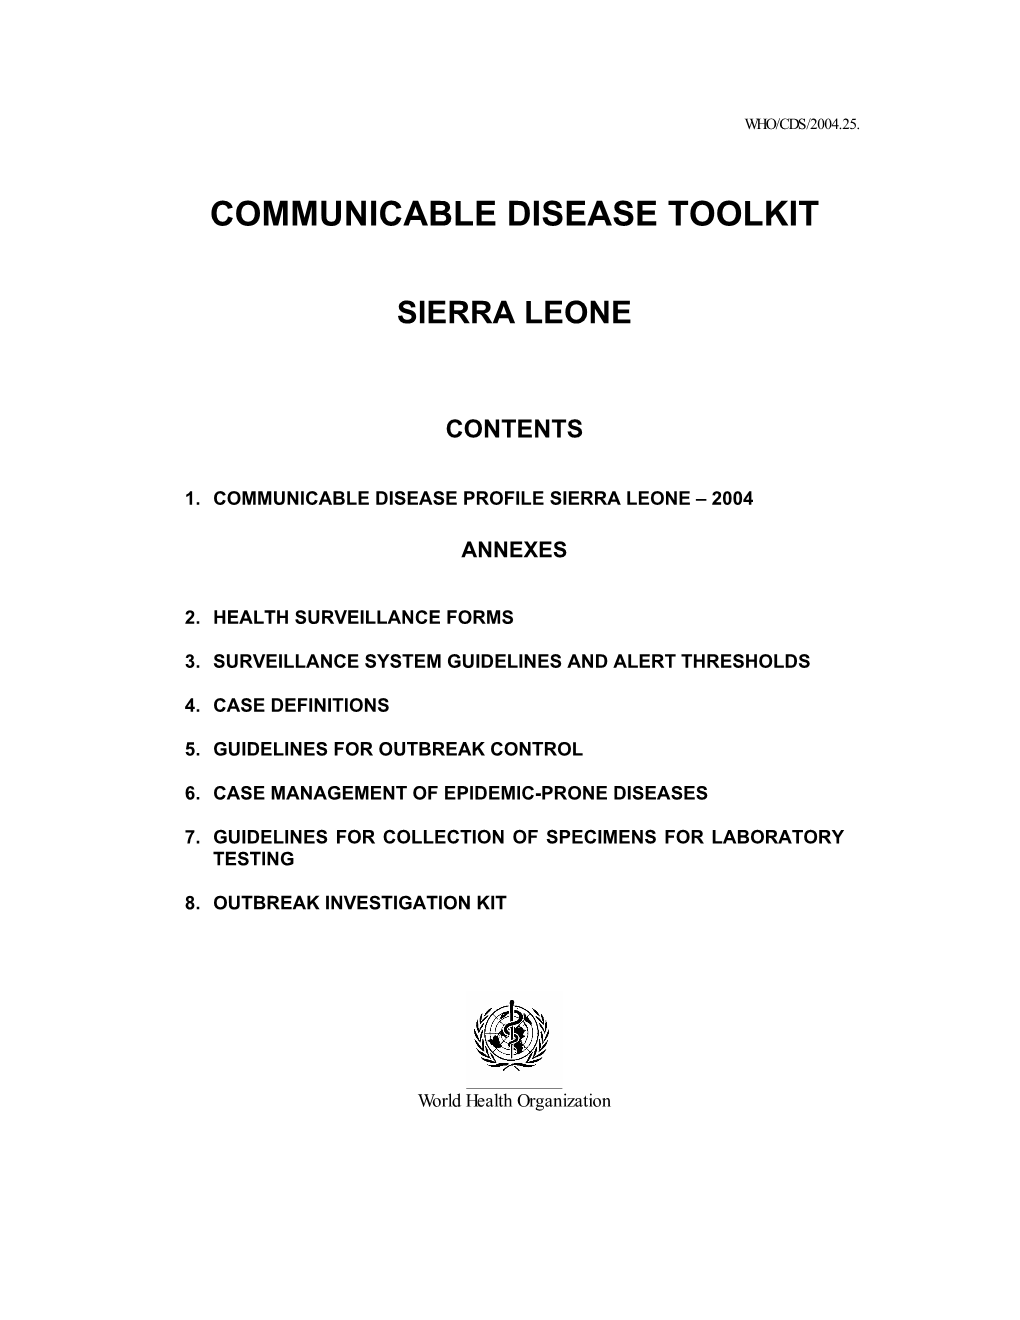 Communicable Disease Toolkit